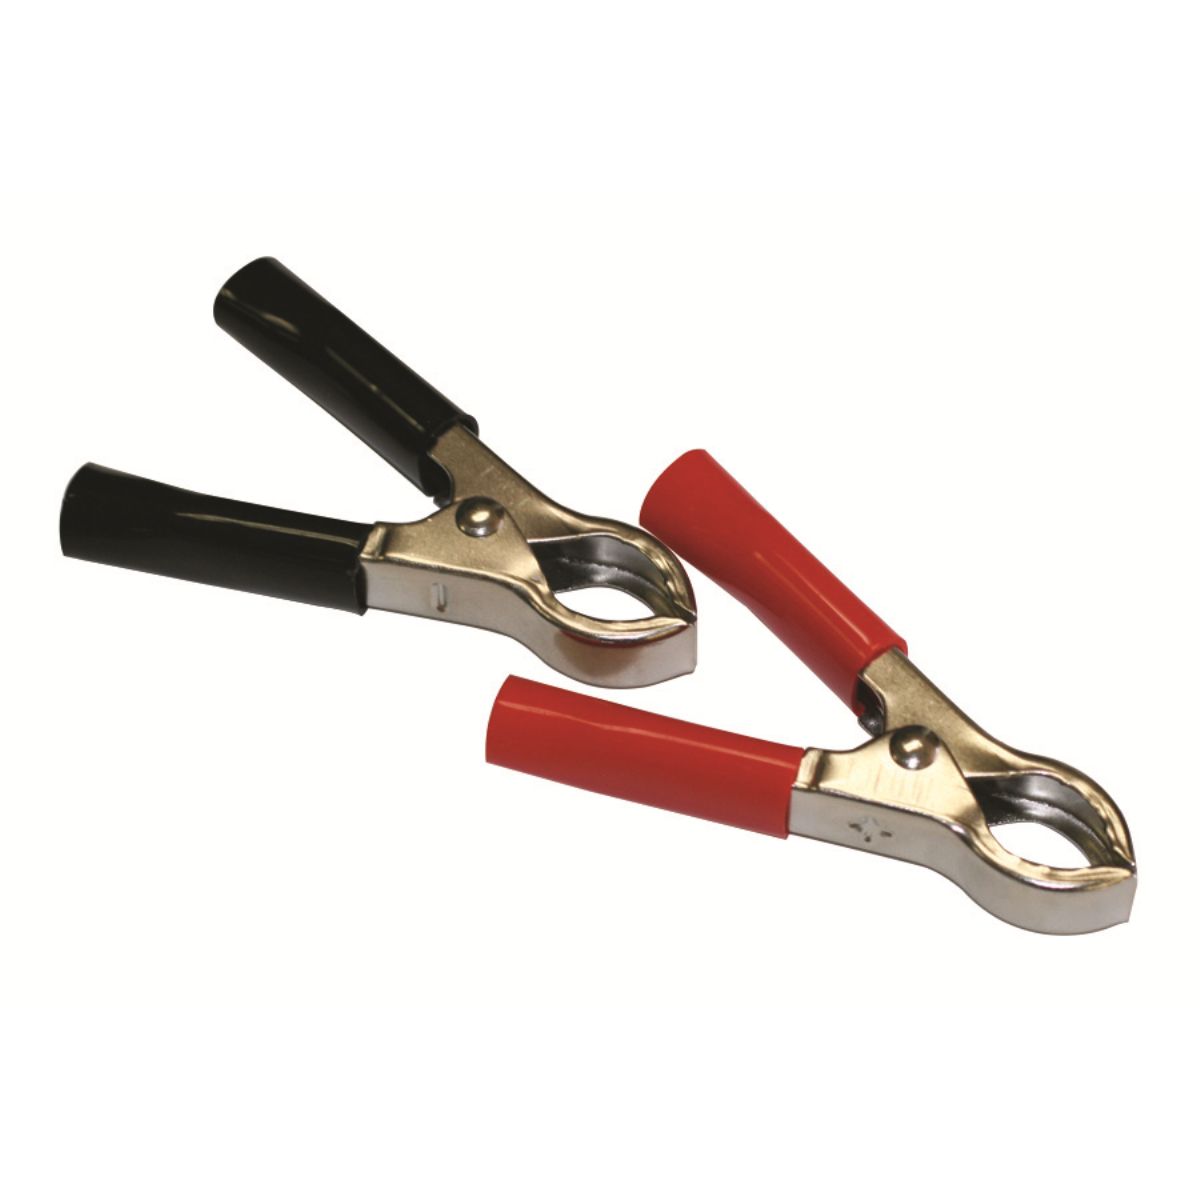 30 Amp Insulated Clamps